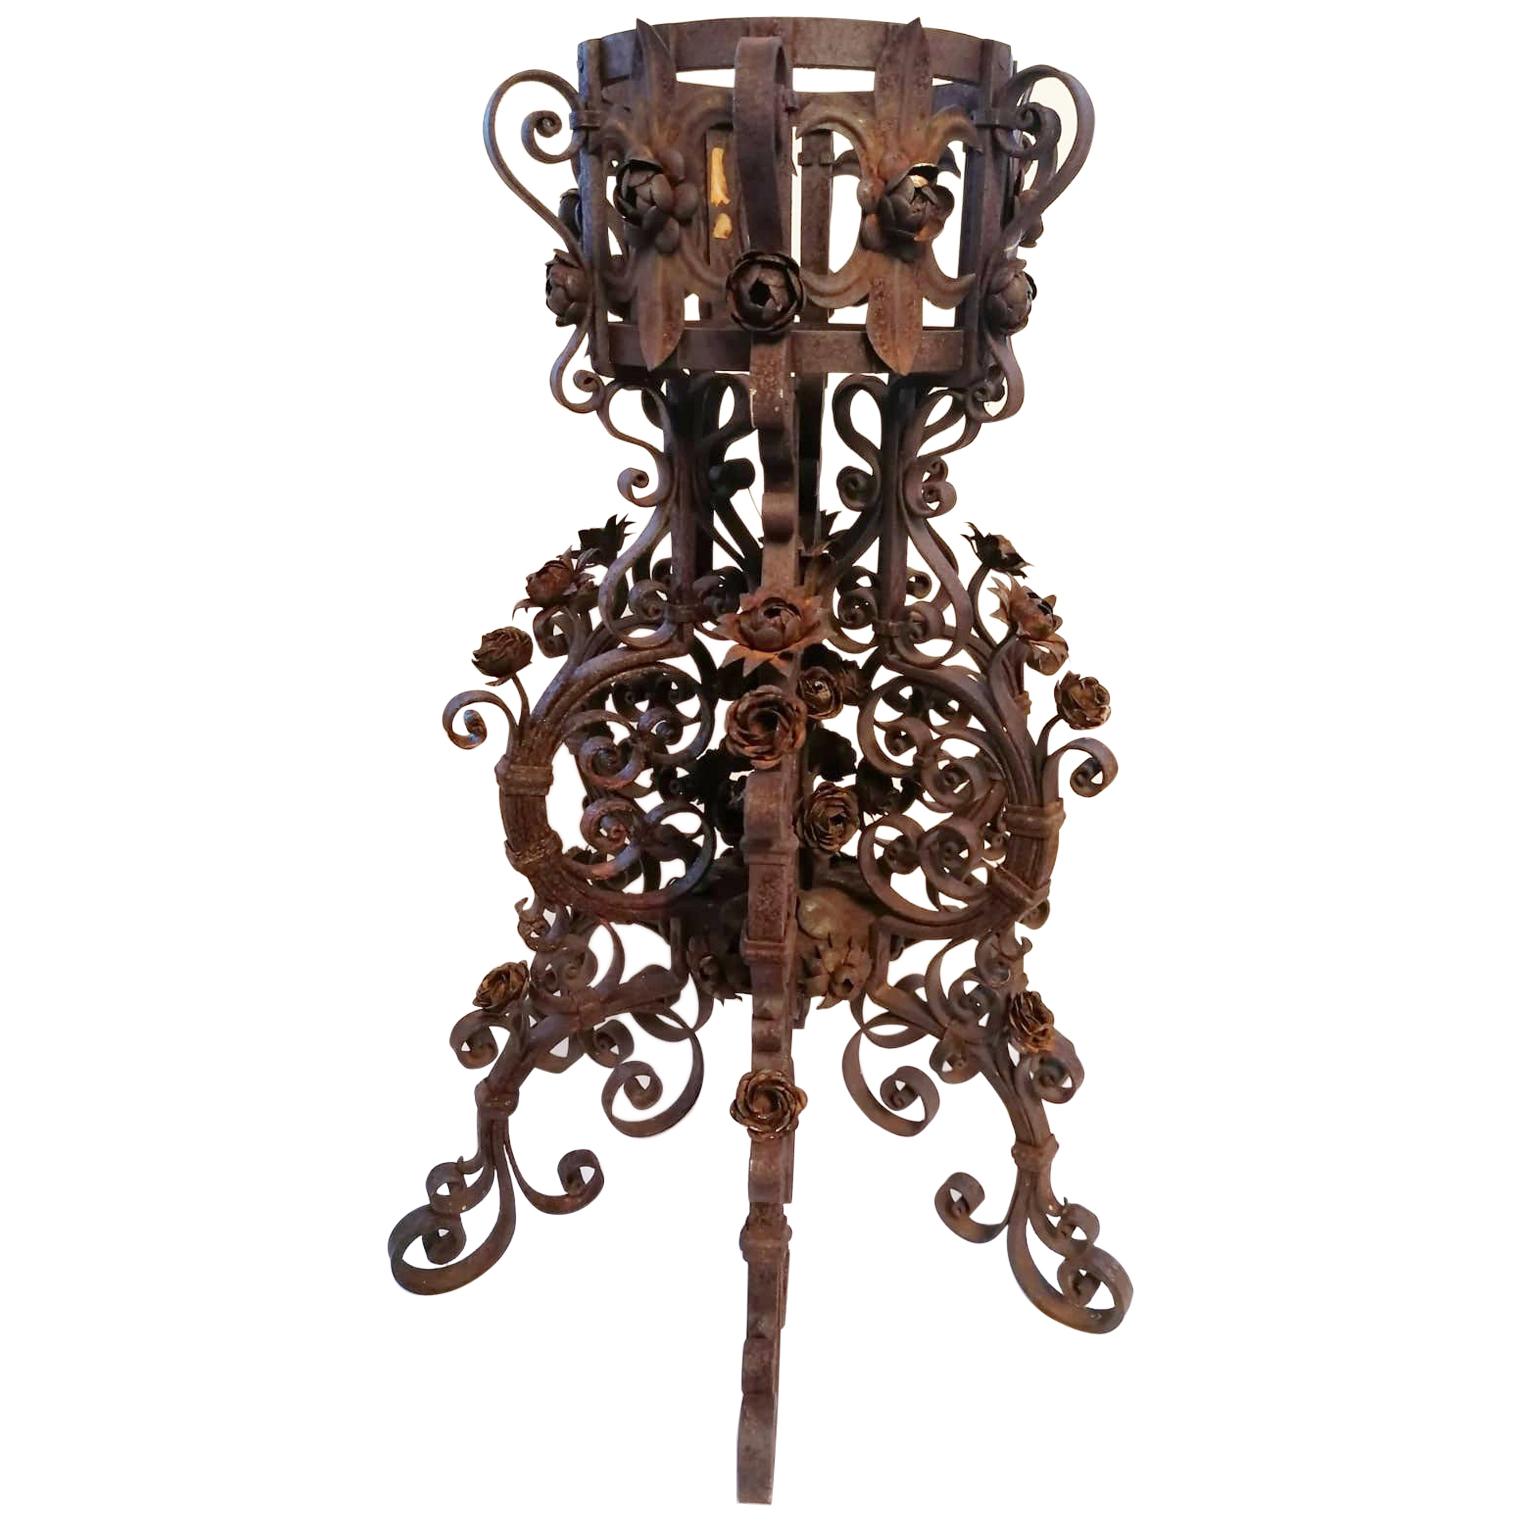 Austrian Art Nouveau Forged Iron Flower Stand For Sale